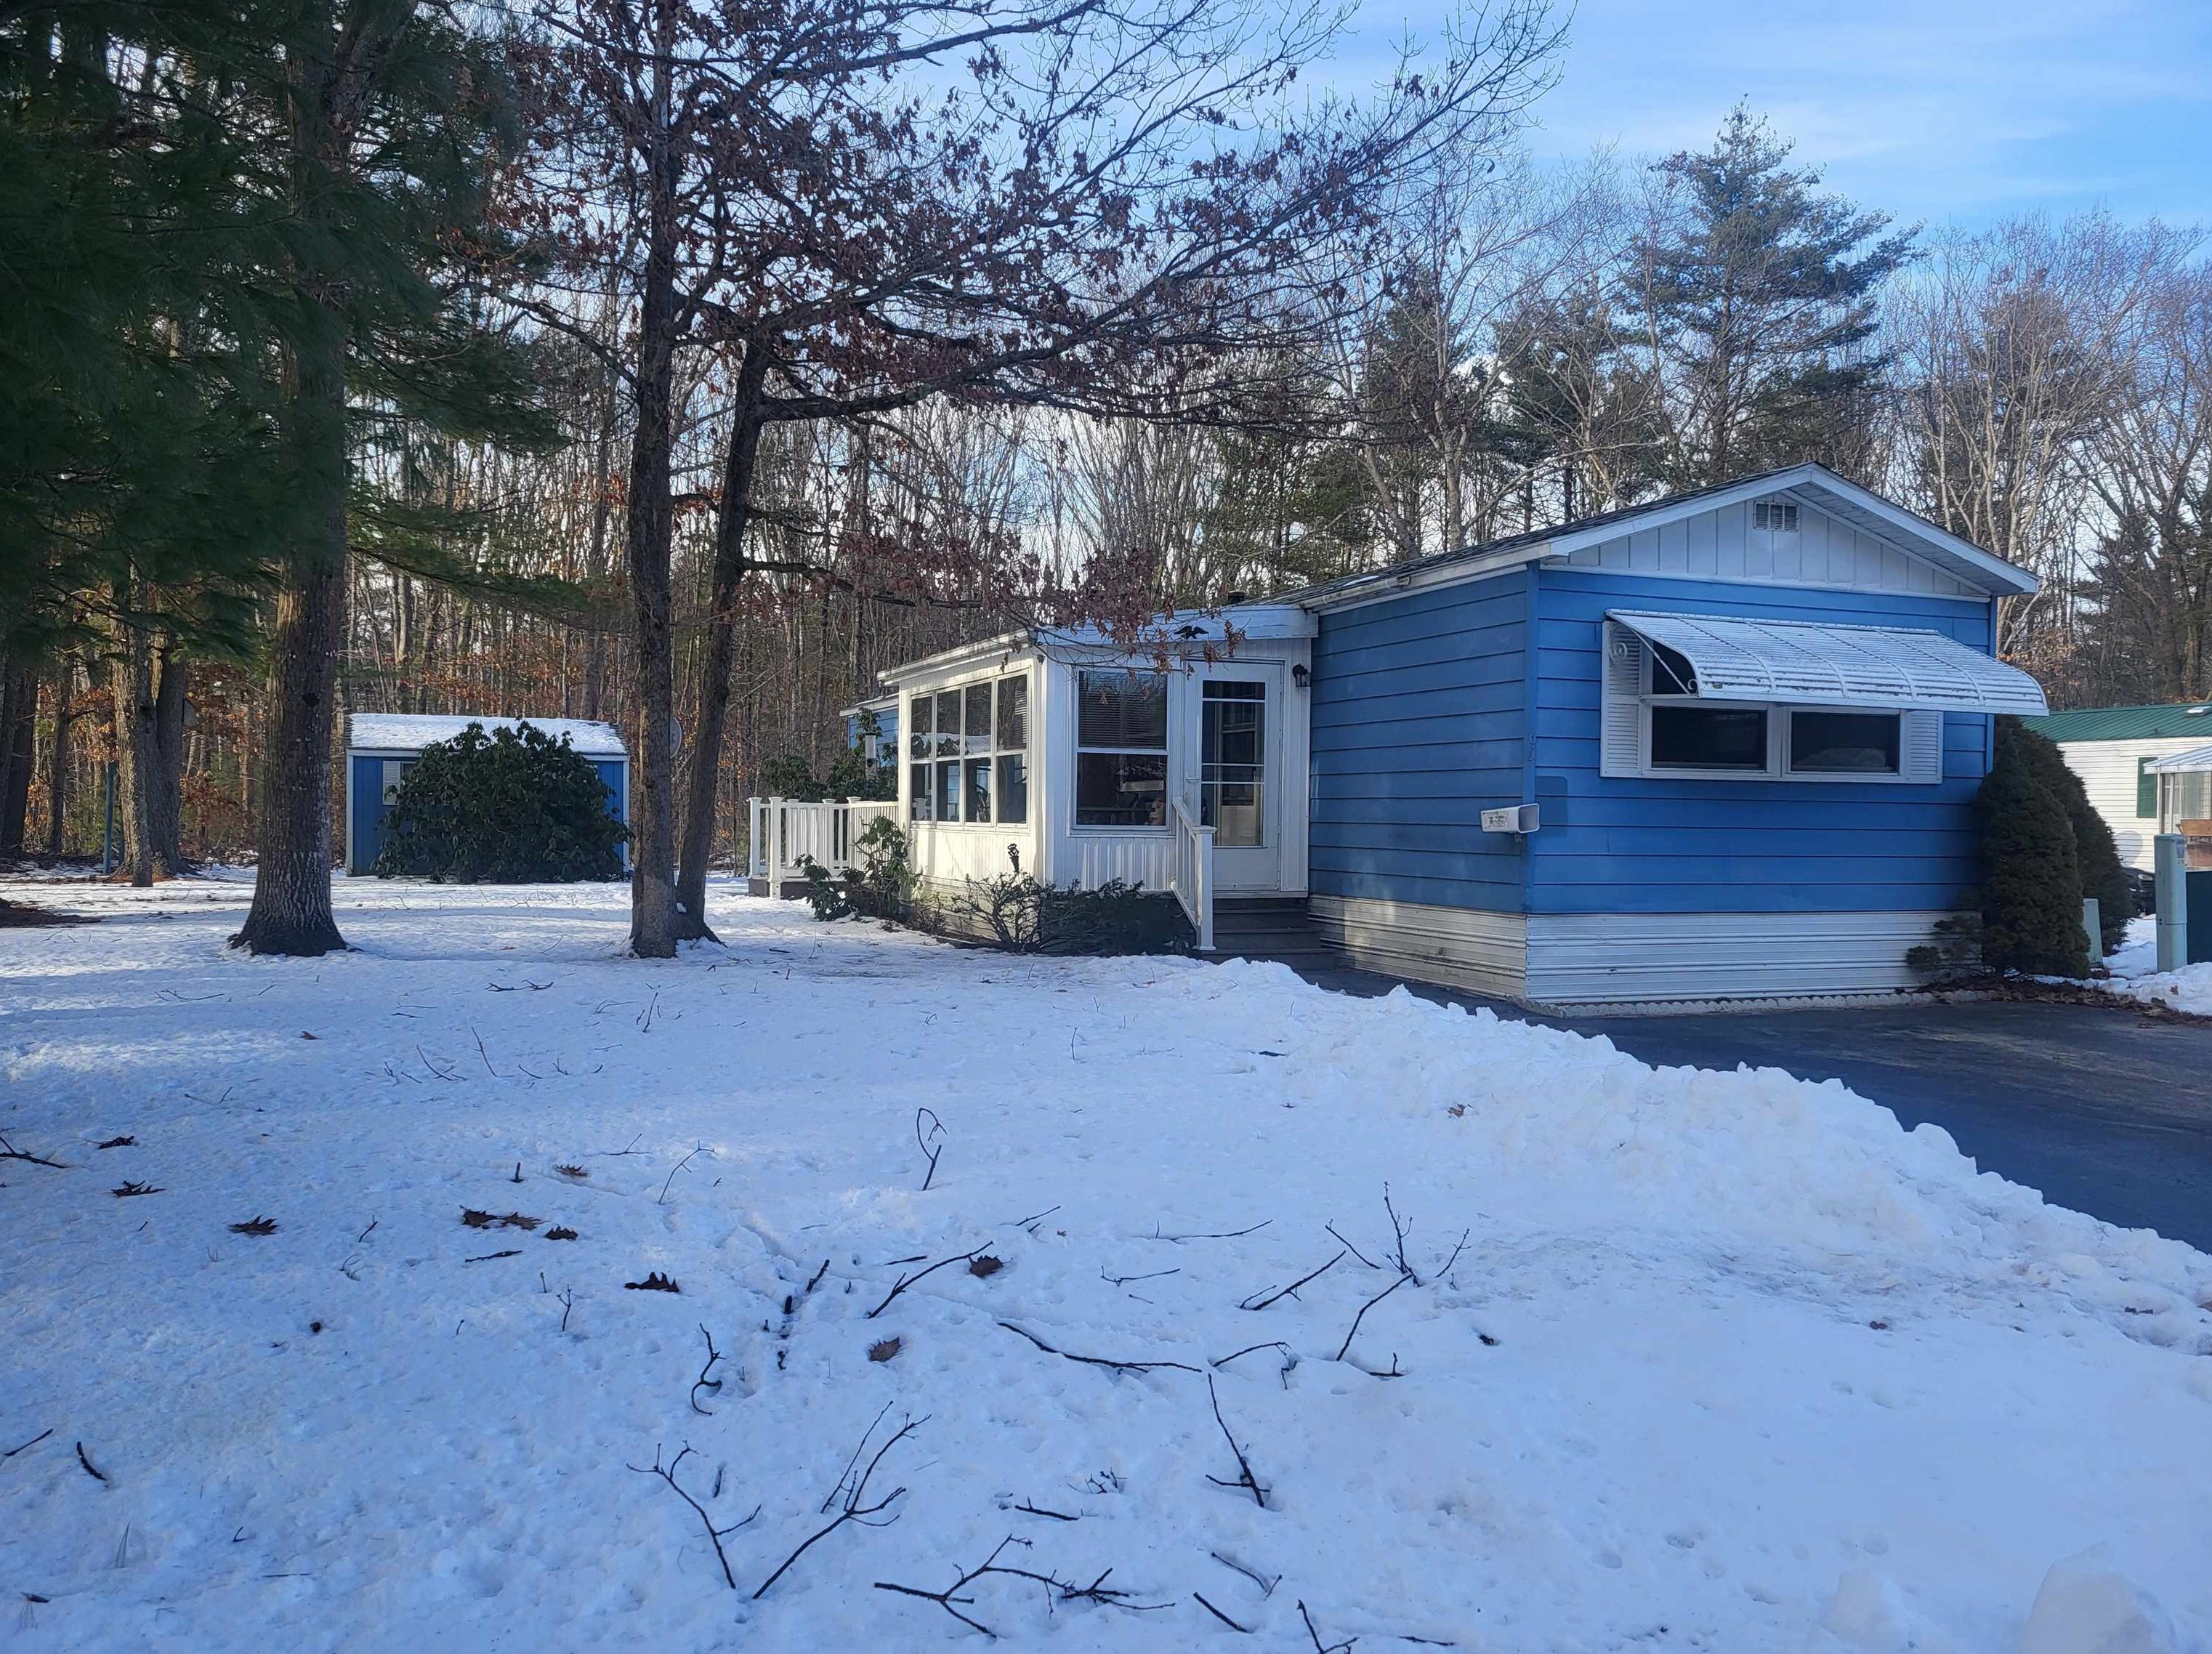 64 Trade Wind Ln, Rochester, NH 03867